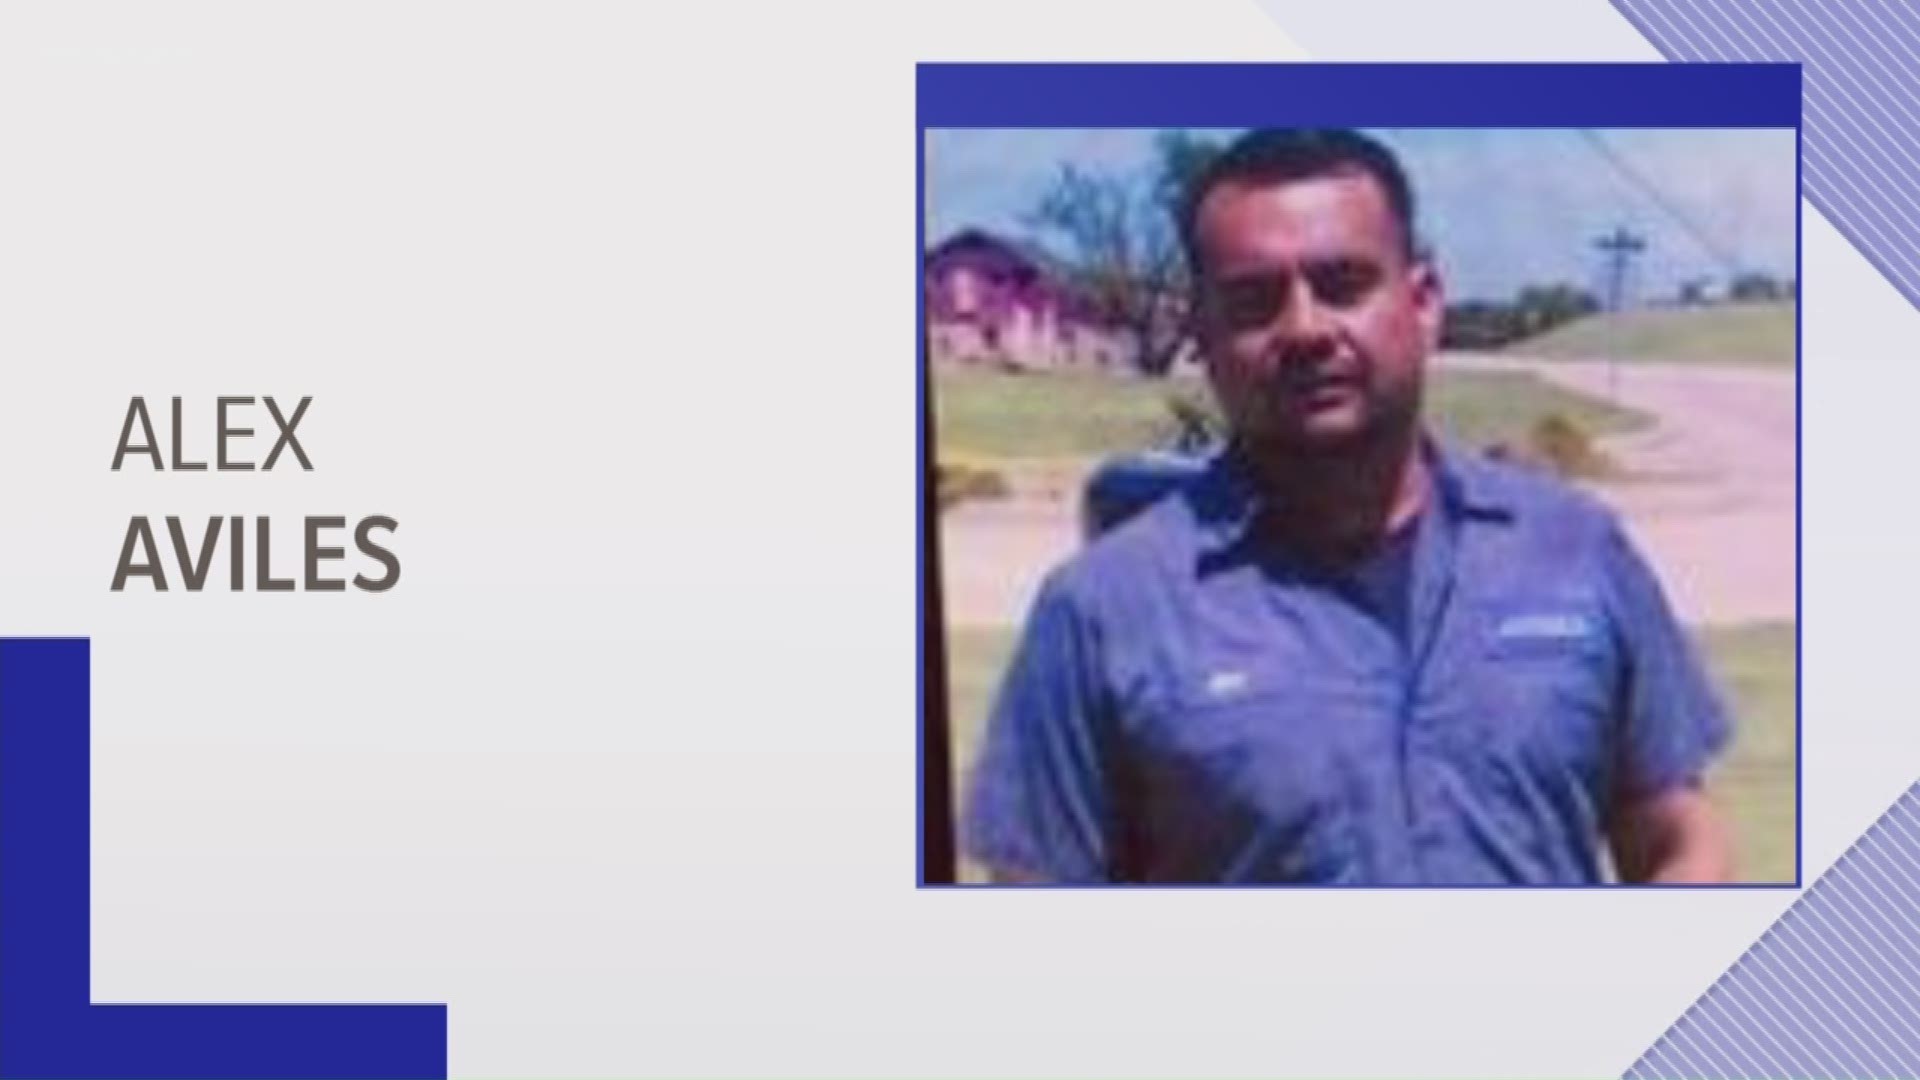 Austin police confirmed they found the body of Alex Aviles in a car on Sunday.